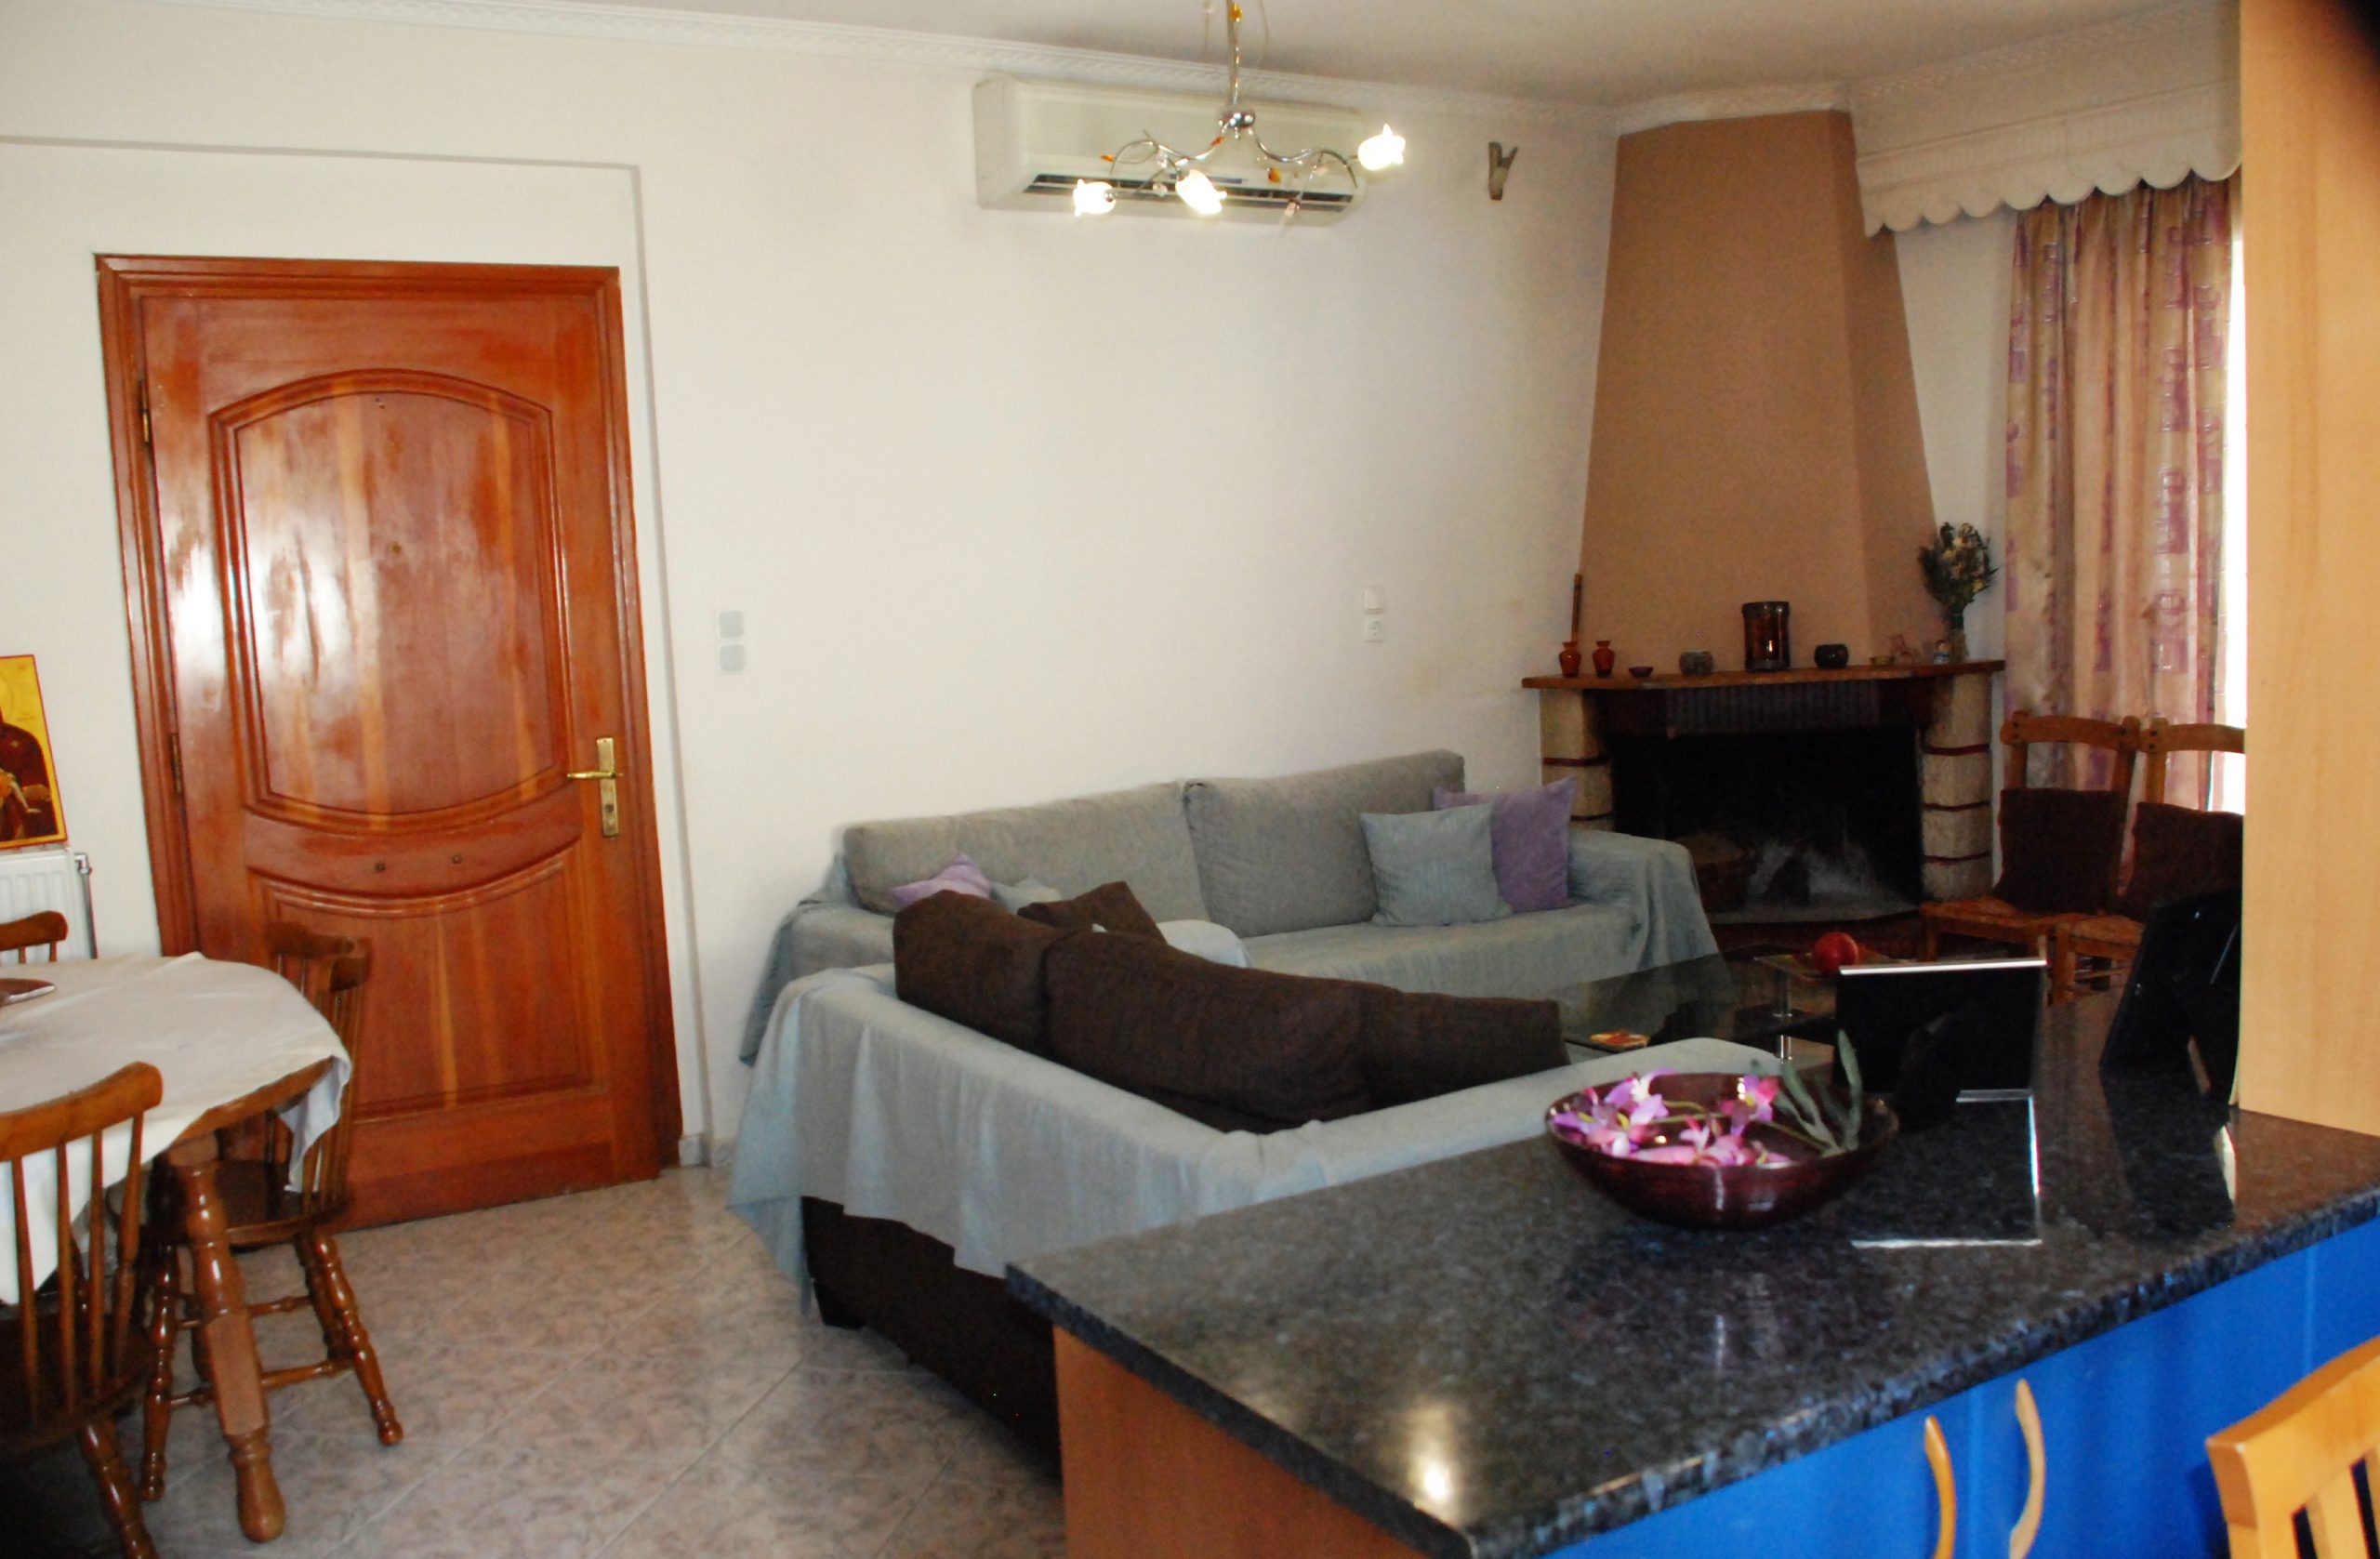 Living room area of house for sale in Patra Greece, Patra